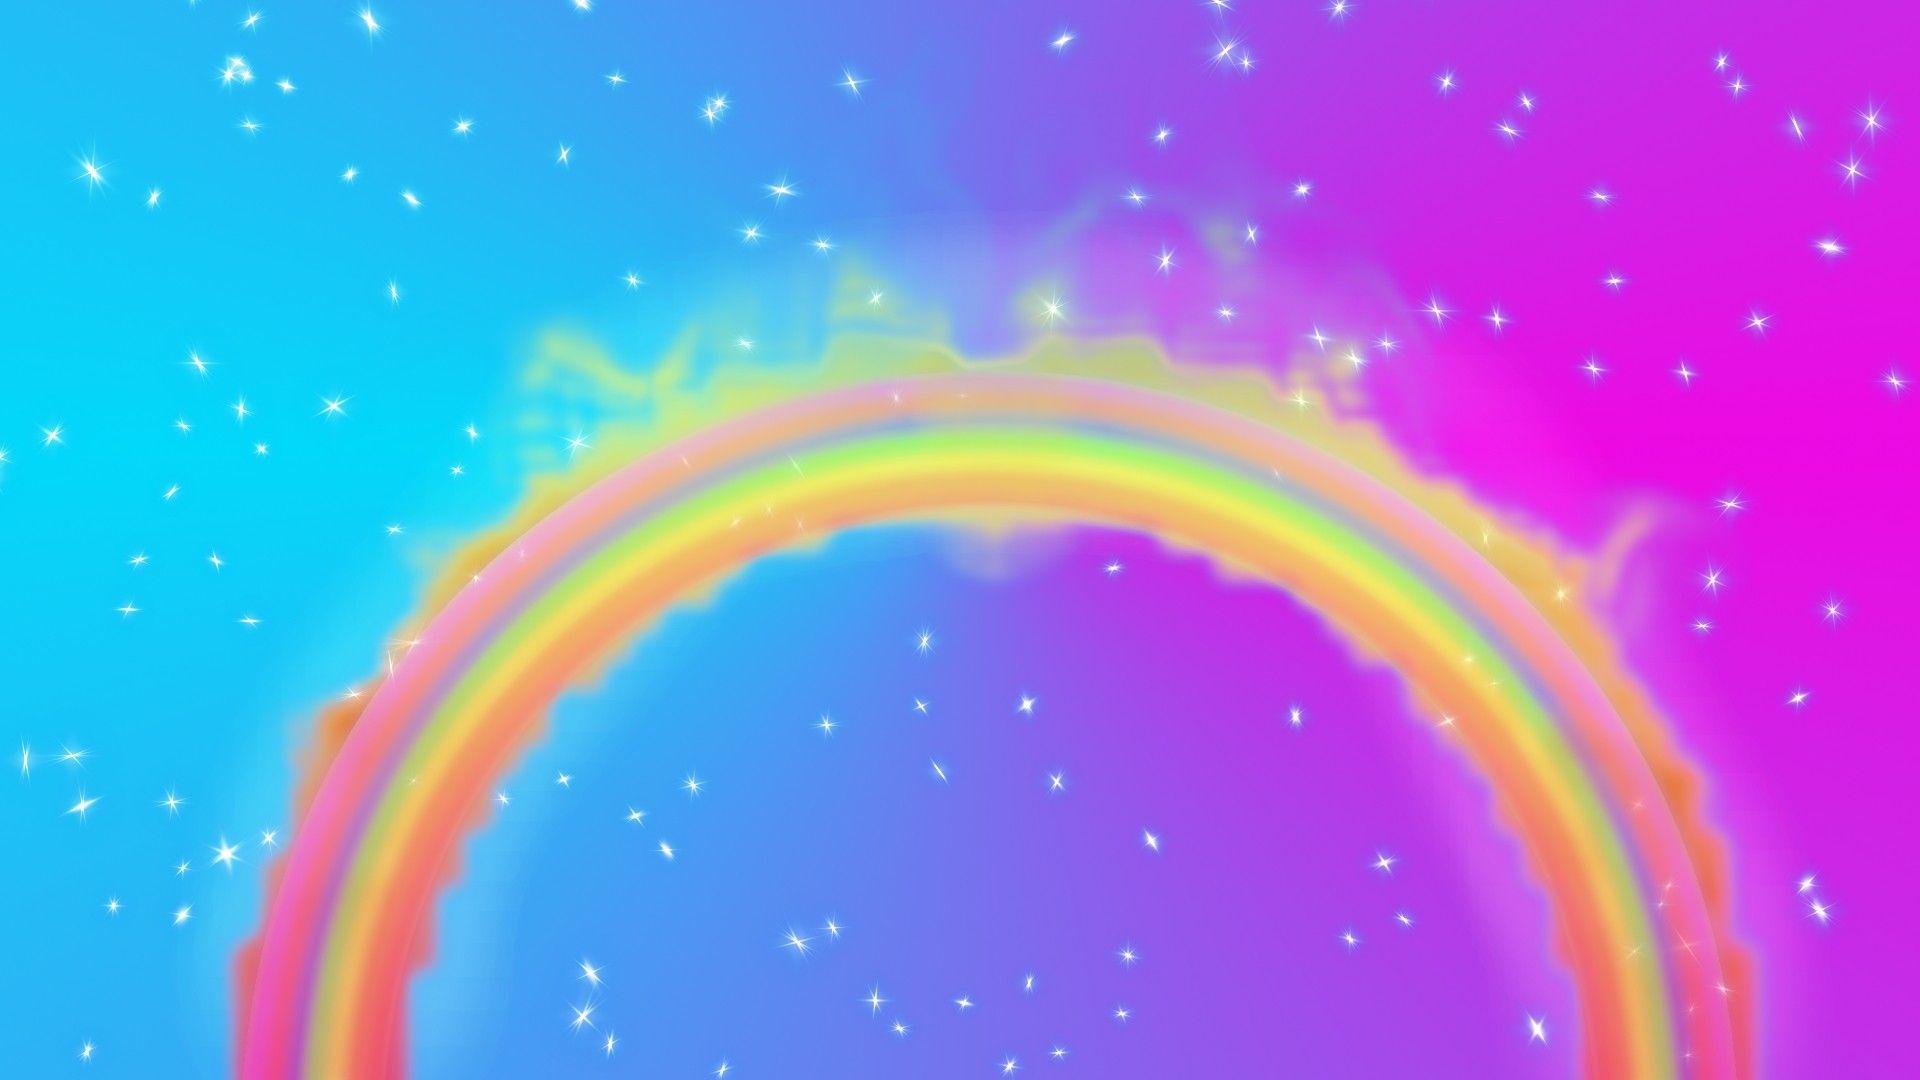 A rainbow is shown on the screen - Rainbows